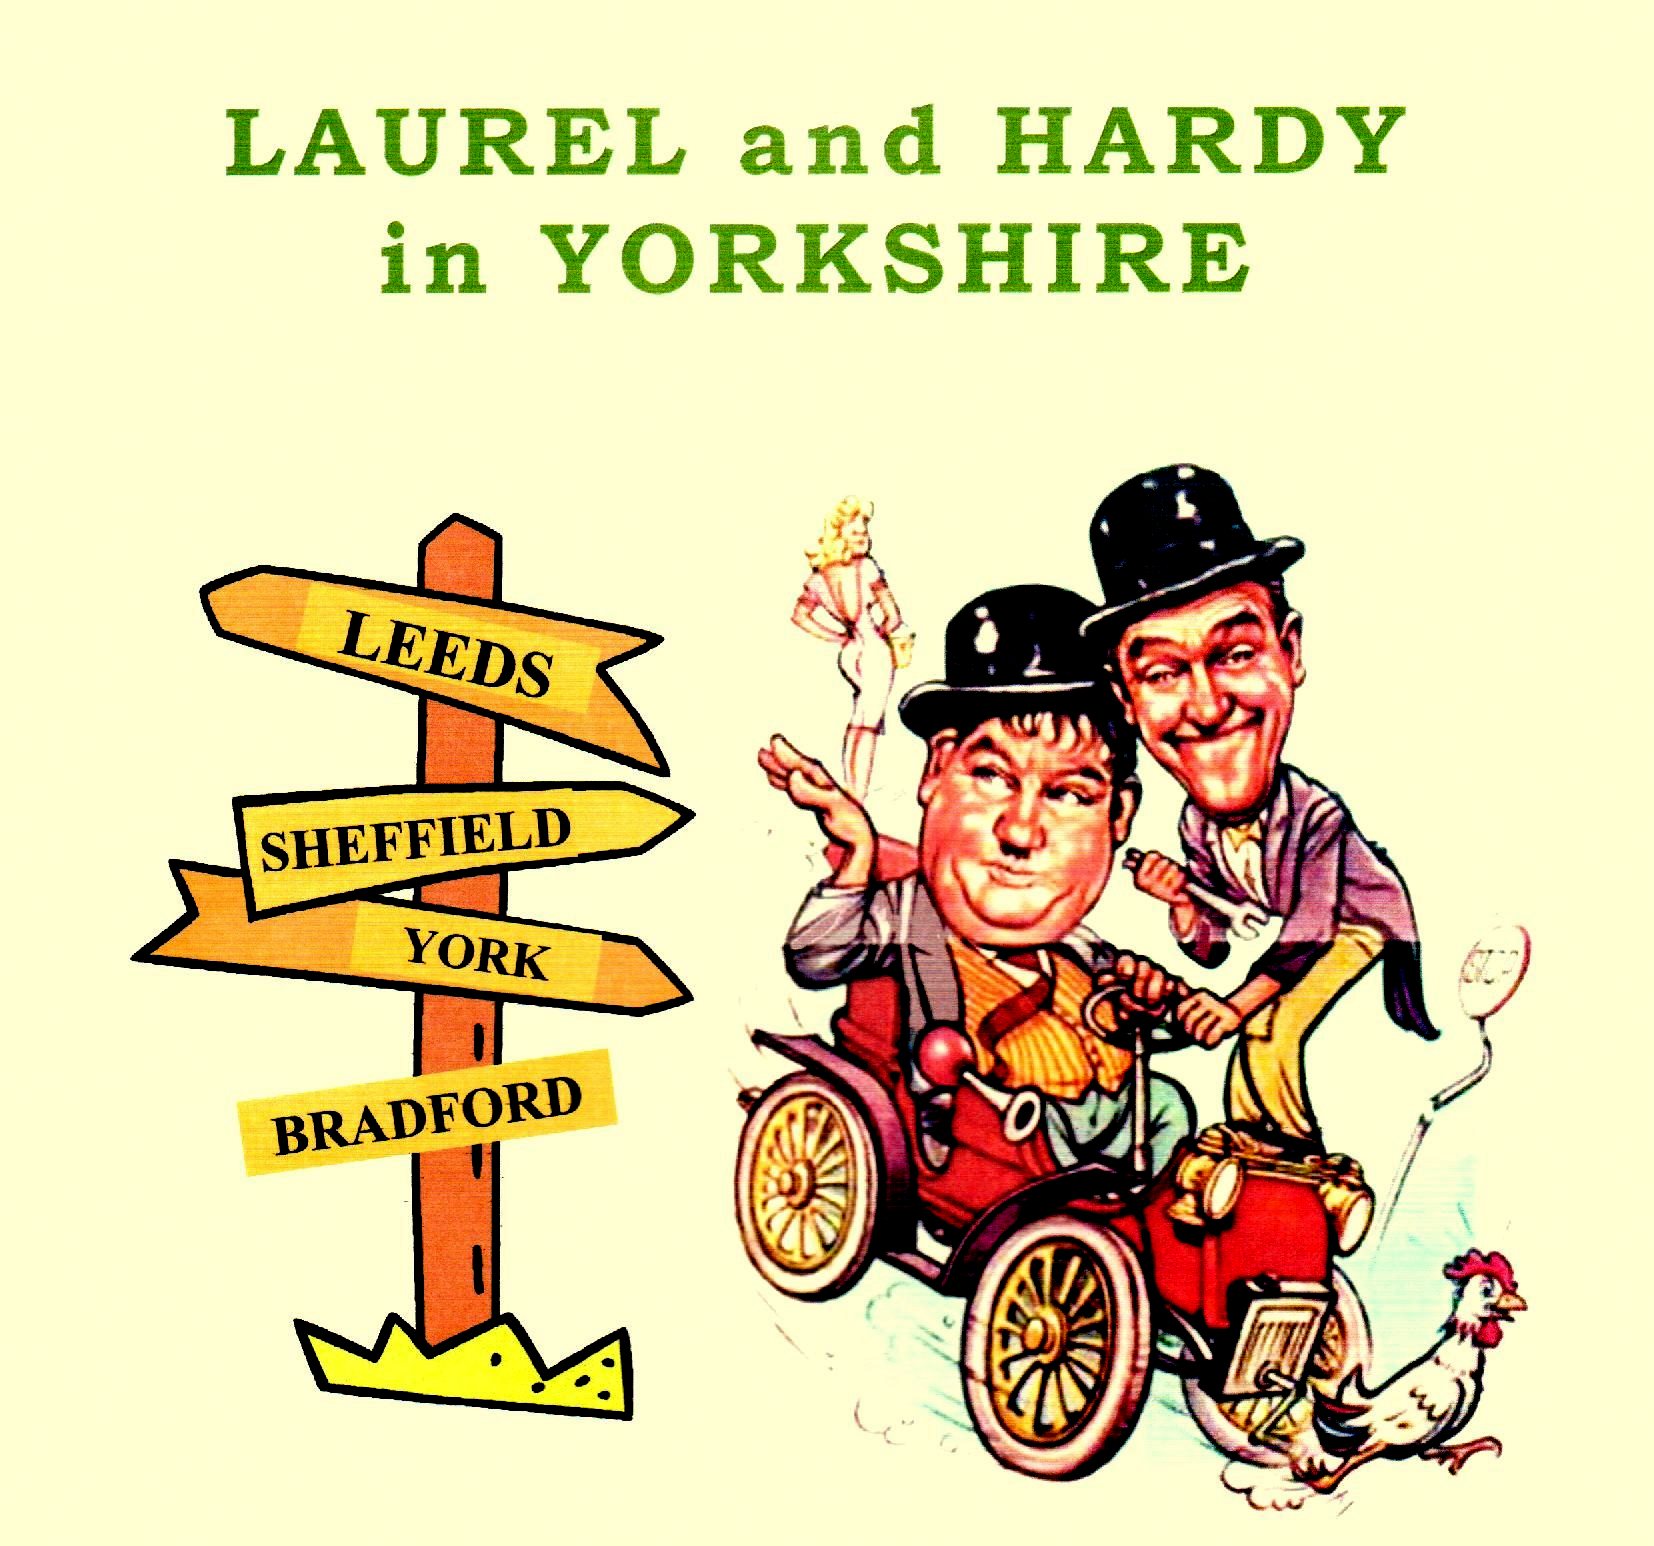 Laurel and Hardy in Yorkshire by author A.J Marriot